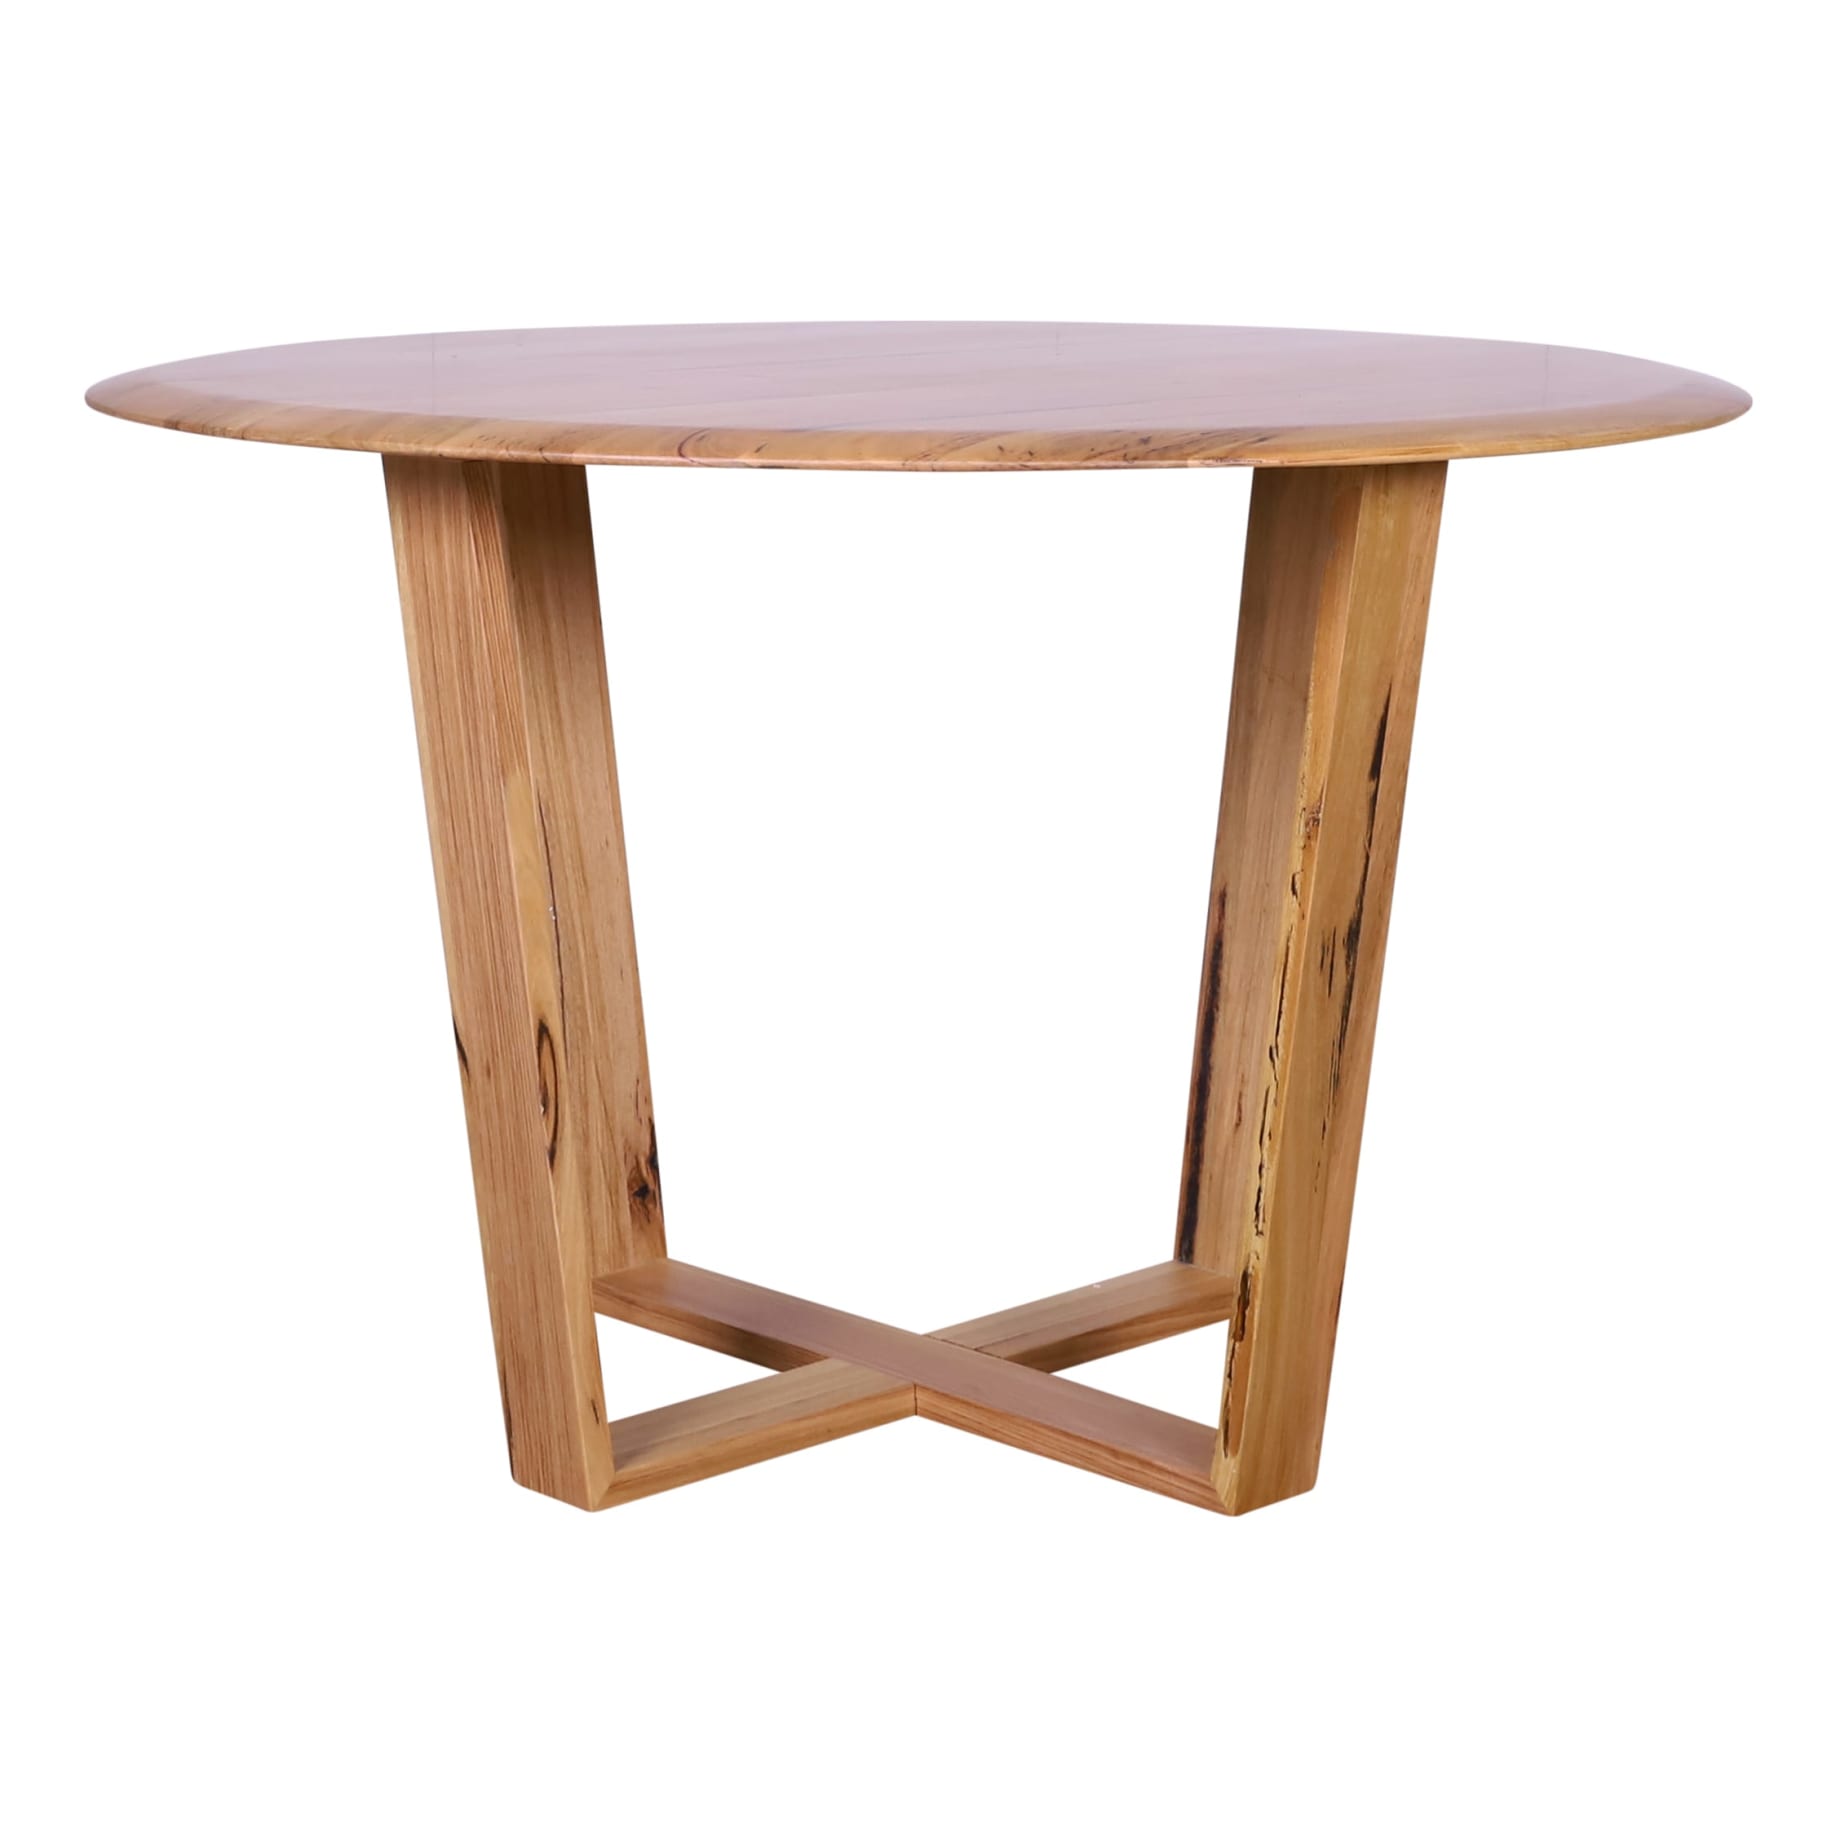 Baxter Round Dining Table 120cm in Australian Messmate